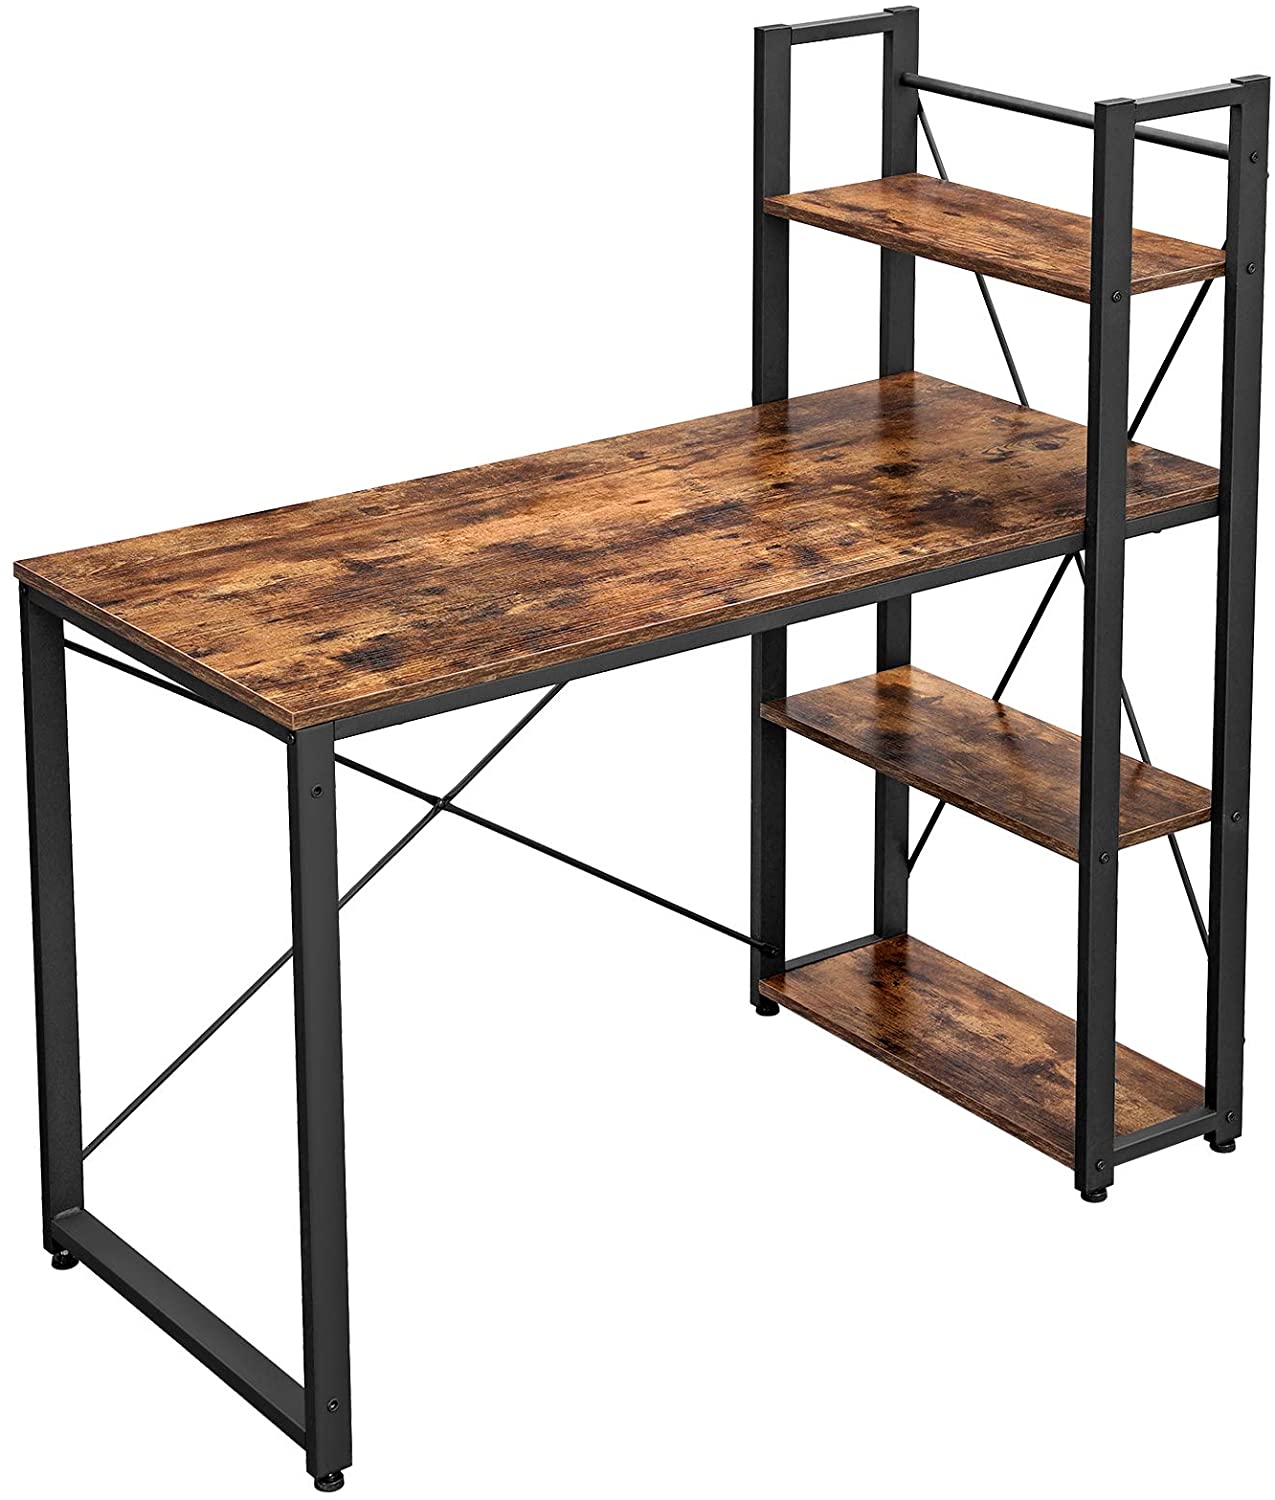 Lifespace Home Office Industrial Computer Desk with Bookshelf - Lifespace